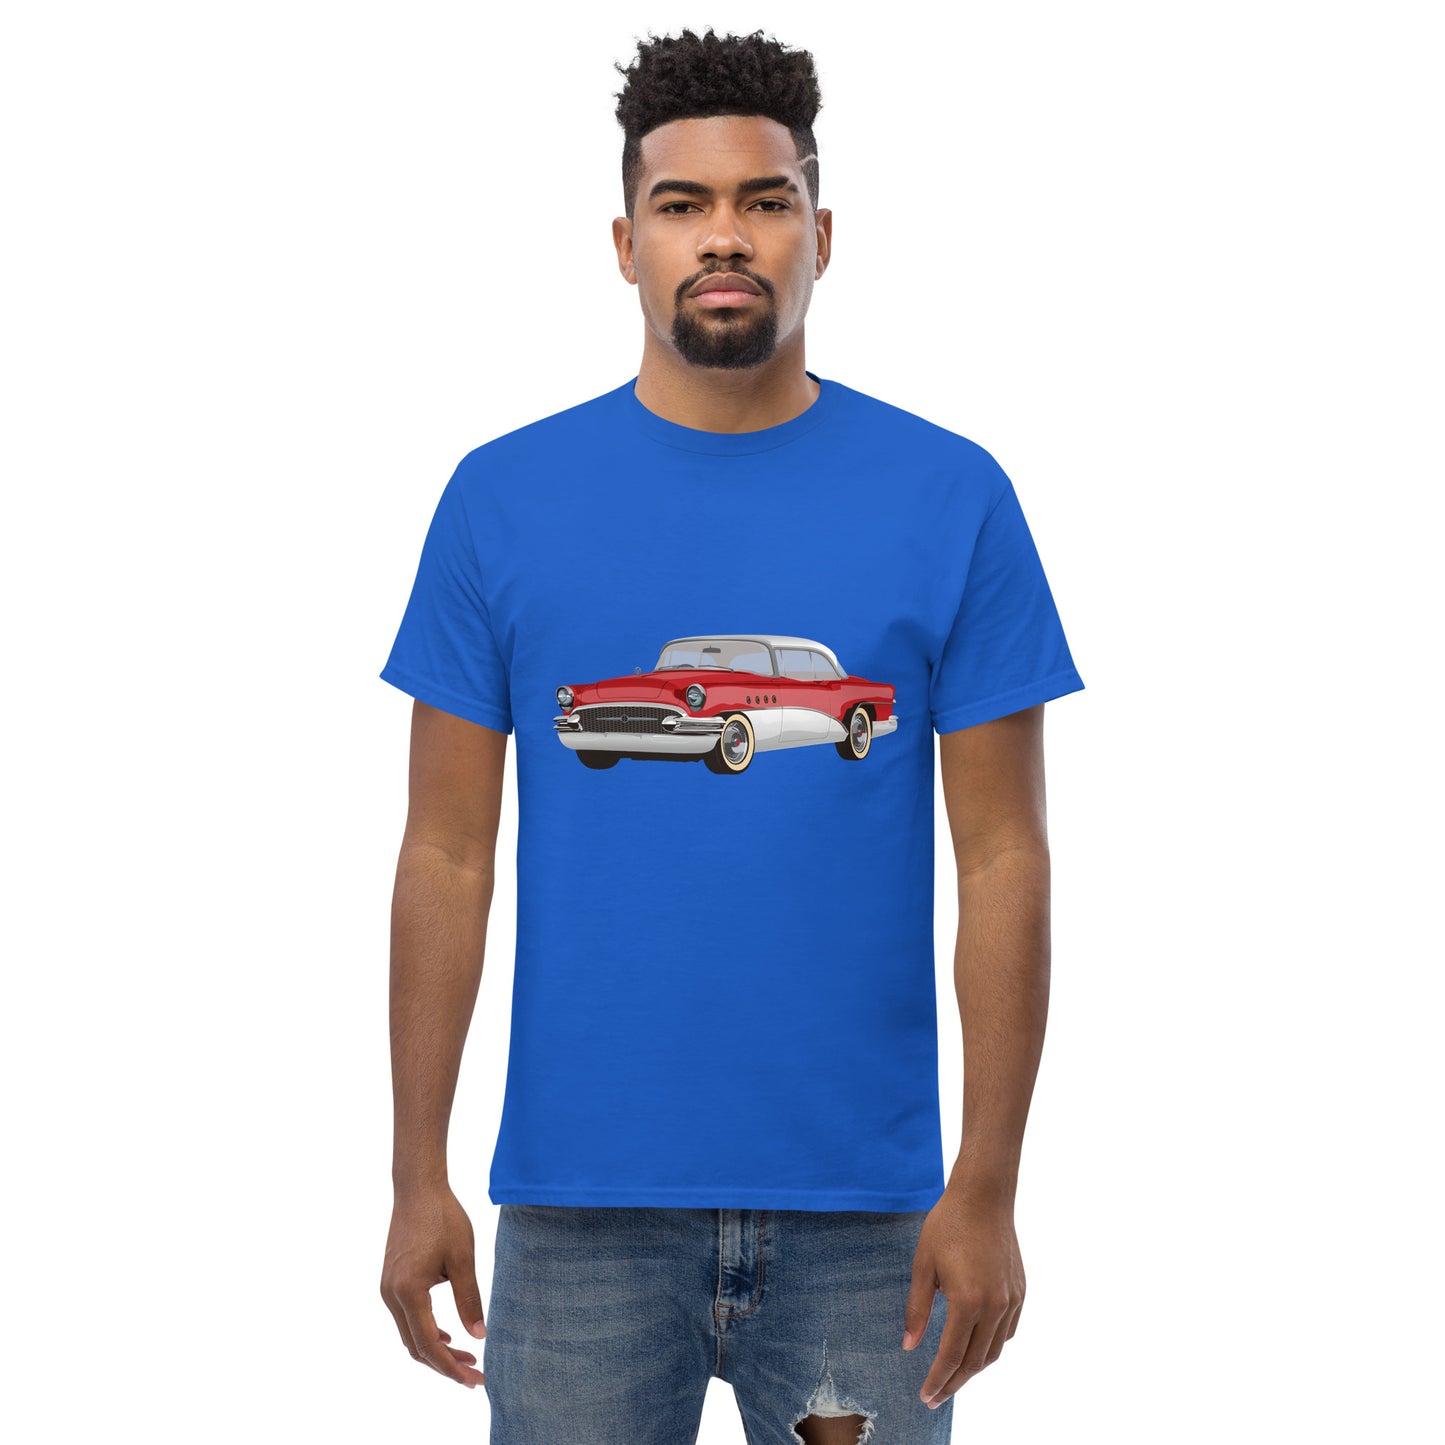 Men with royal blue t-shirt with red Chevrolet 